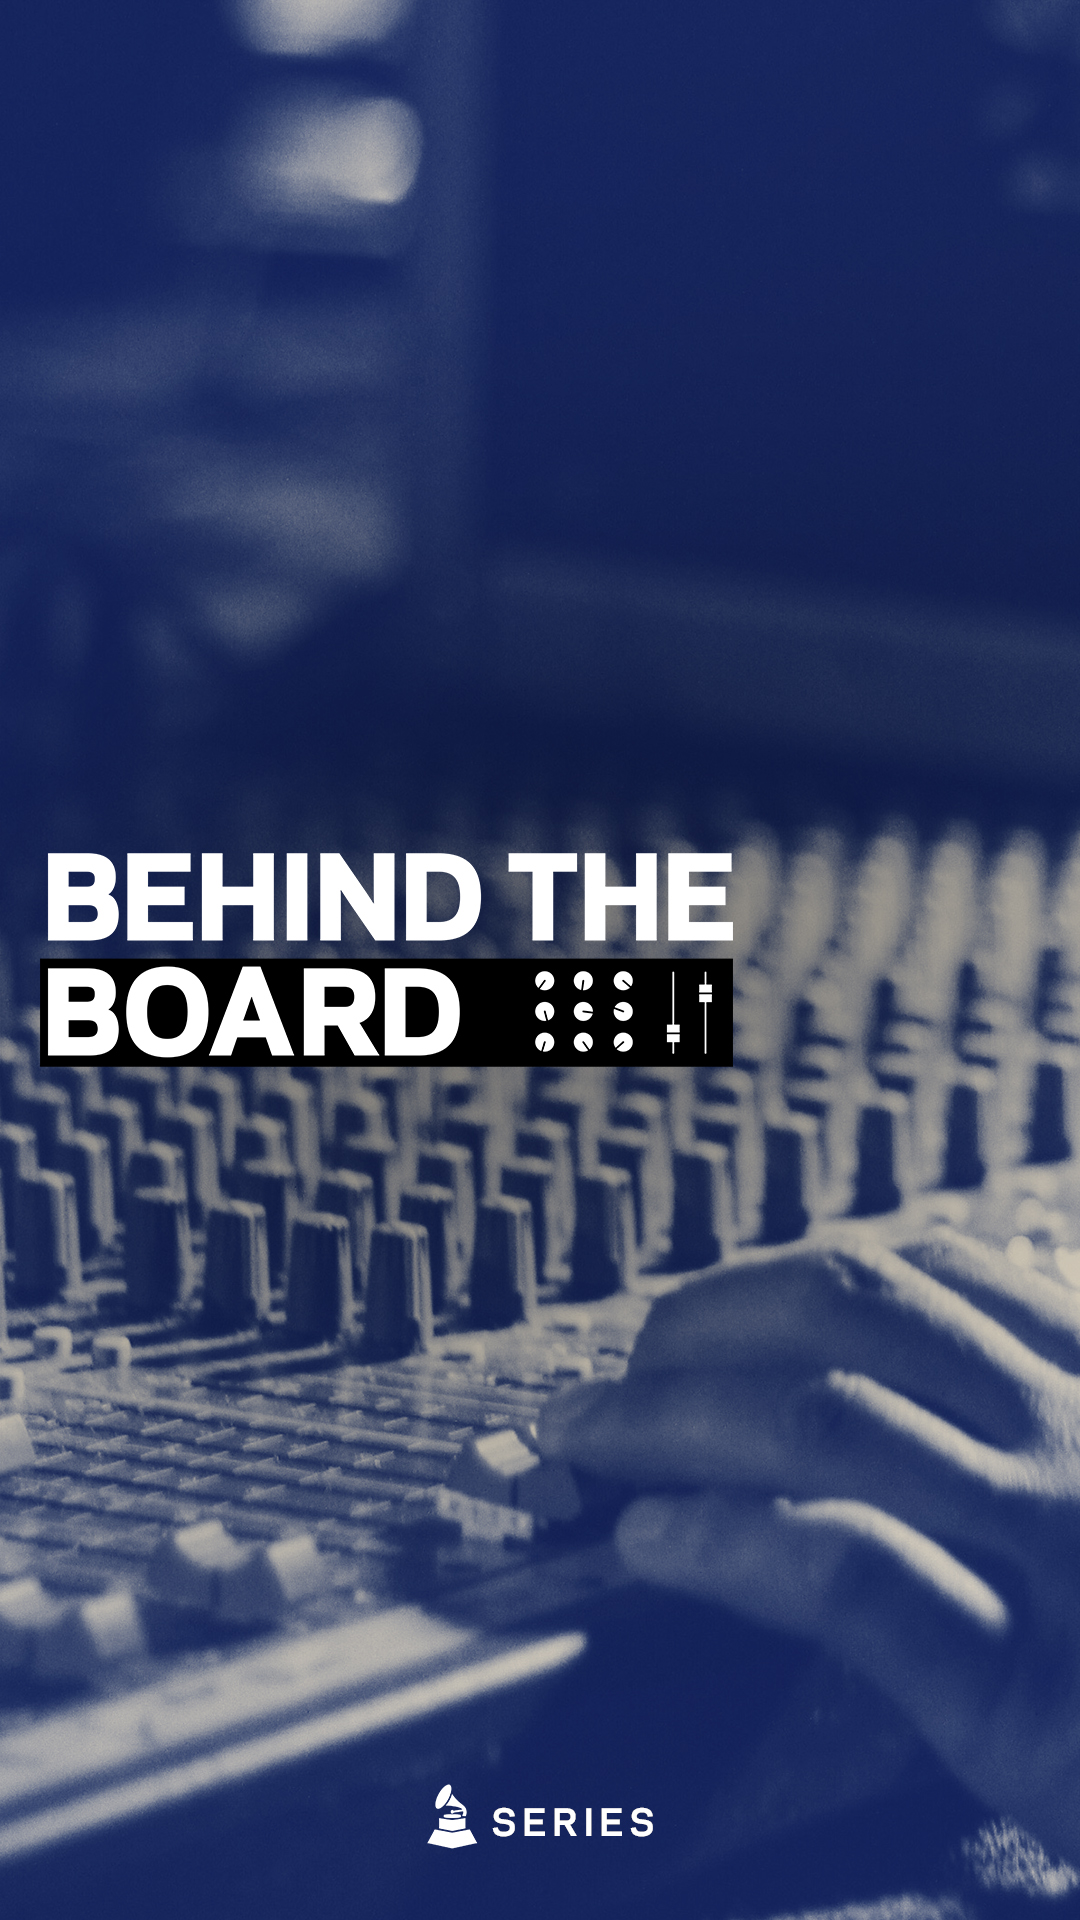 Haywood Takes You Inside Her "Messy" Creative Process | Behind The Board